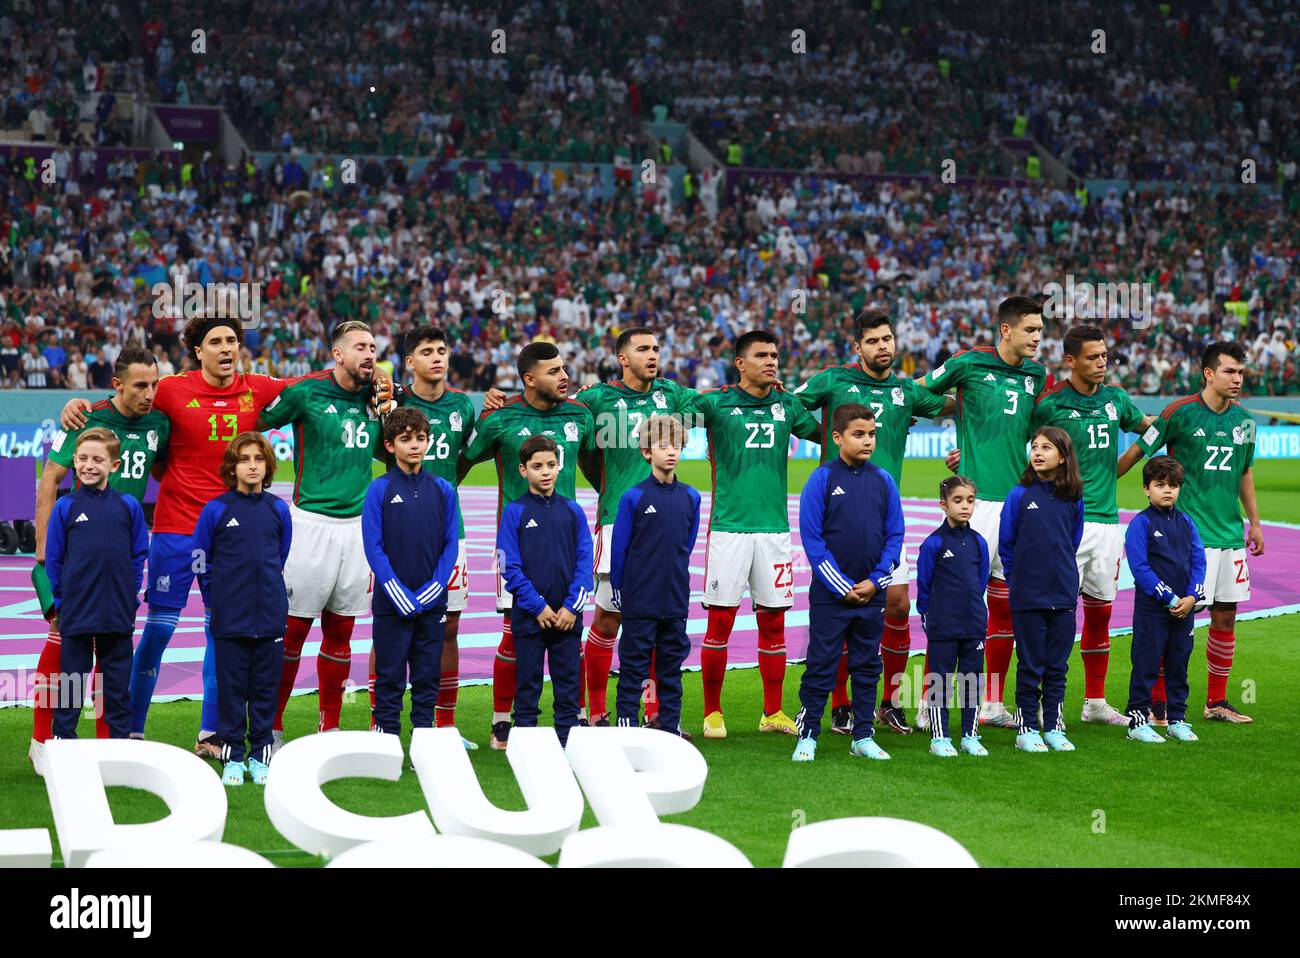 Lusail, Qatar. 26th Nov, 2022. Soccer, World Cup, Argentina - Mexico, Preliminary Round, Group C, Matchday 2, Lusail Iconic Stadium, the players of Mexico's starting eleven stand next to each other during the national anthem, Andrés Guardado (l-r), goalkeeper Guillermo Ochoa, Kevin Alvarez, Alexis Vega, Luis Chavez, Jesus Gallardo, Nestor Araujo, Cesar Montes, Hector Moreno and Hirving Lozano. Credit: Tom Weller/dpa/Alamy Live News Stock Photo